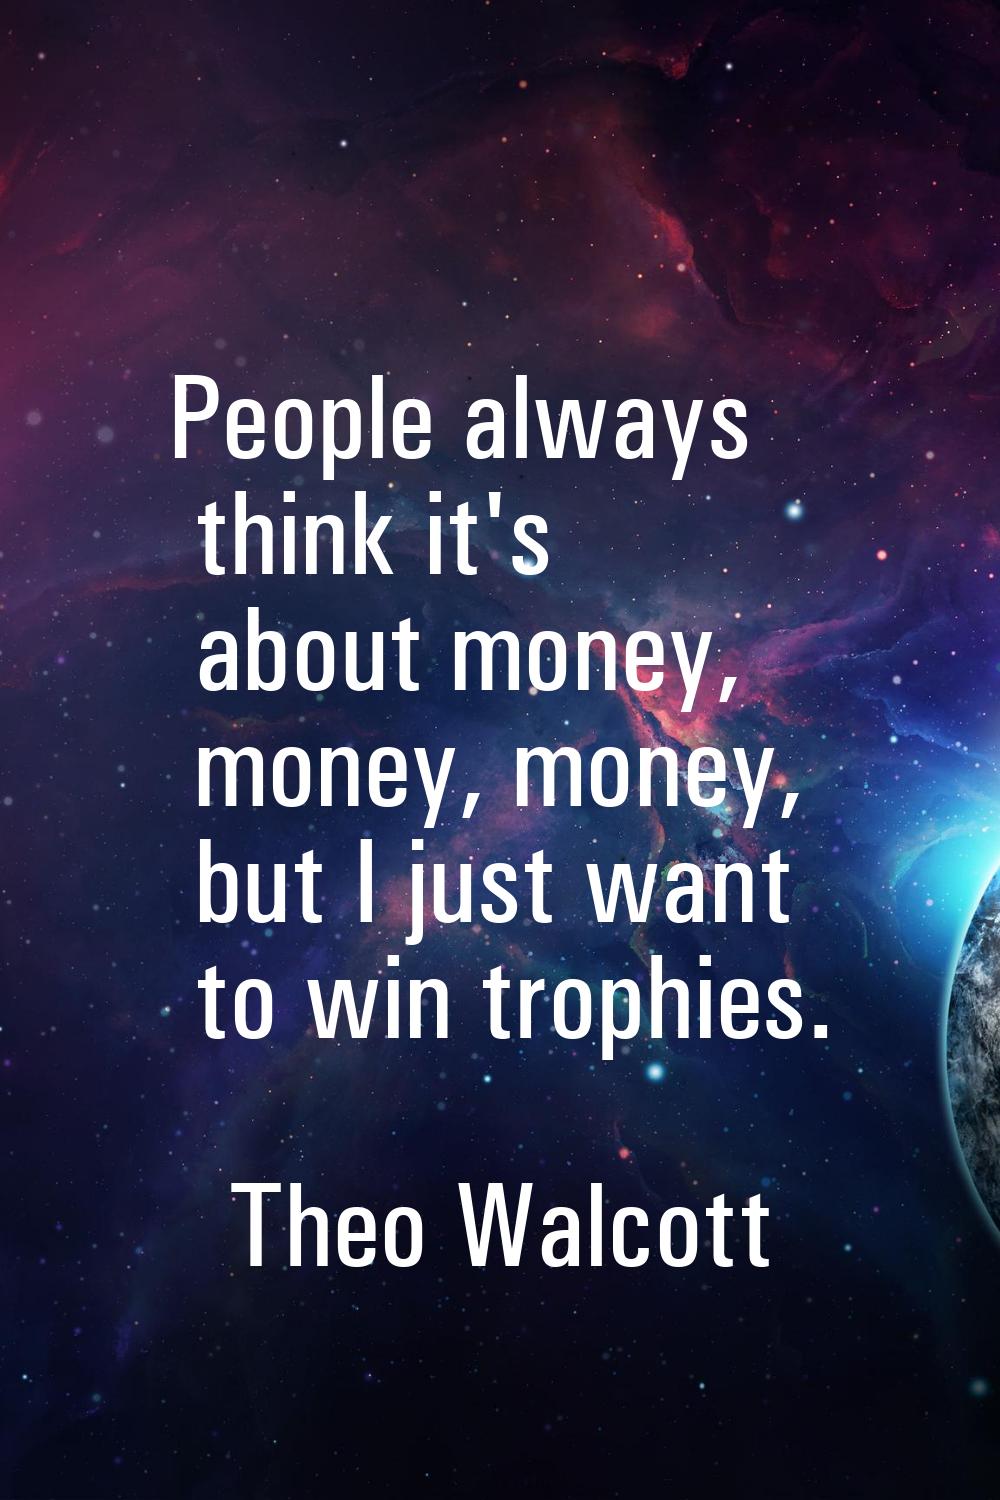 People always think it's about money, money, money, but I just want to win trophies.